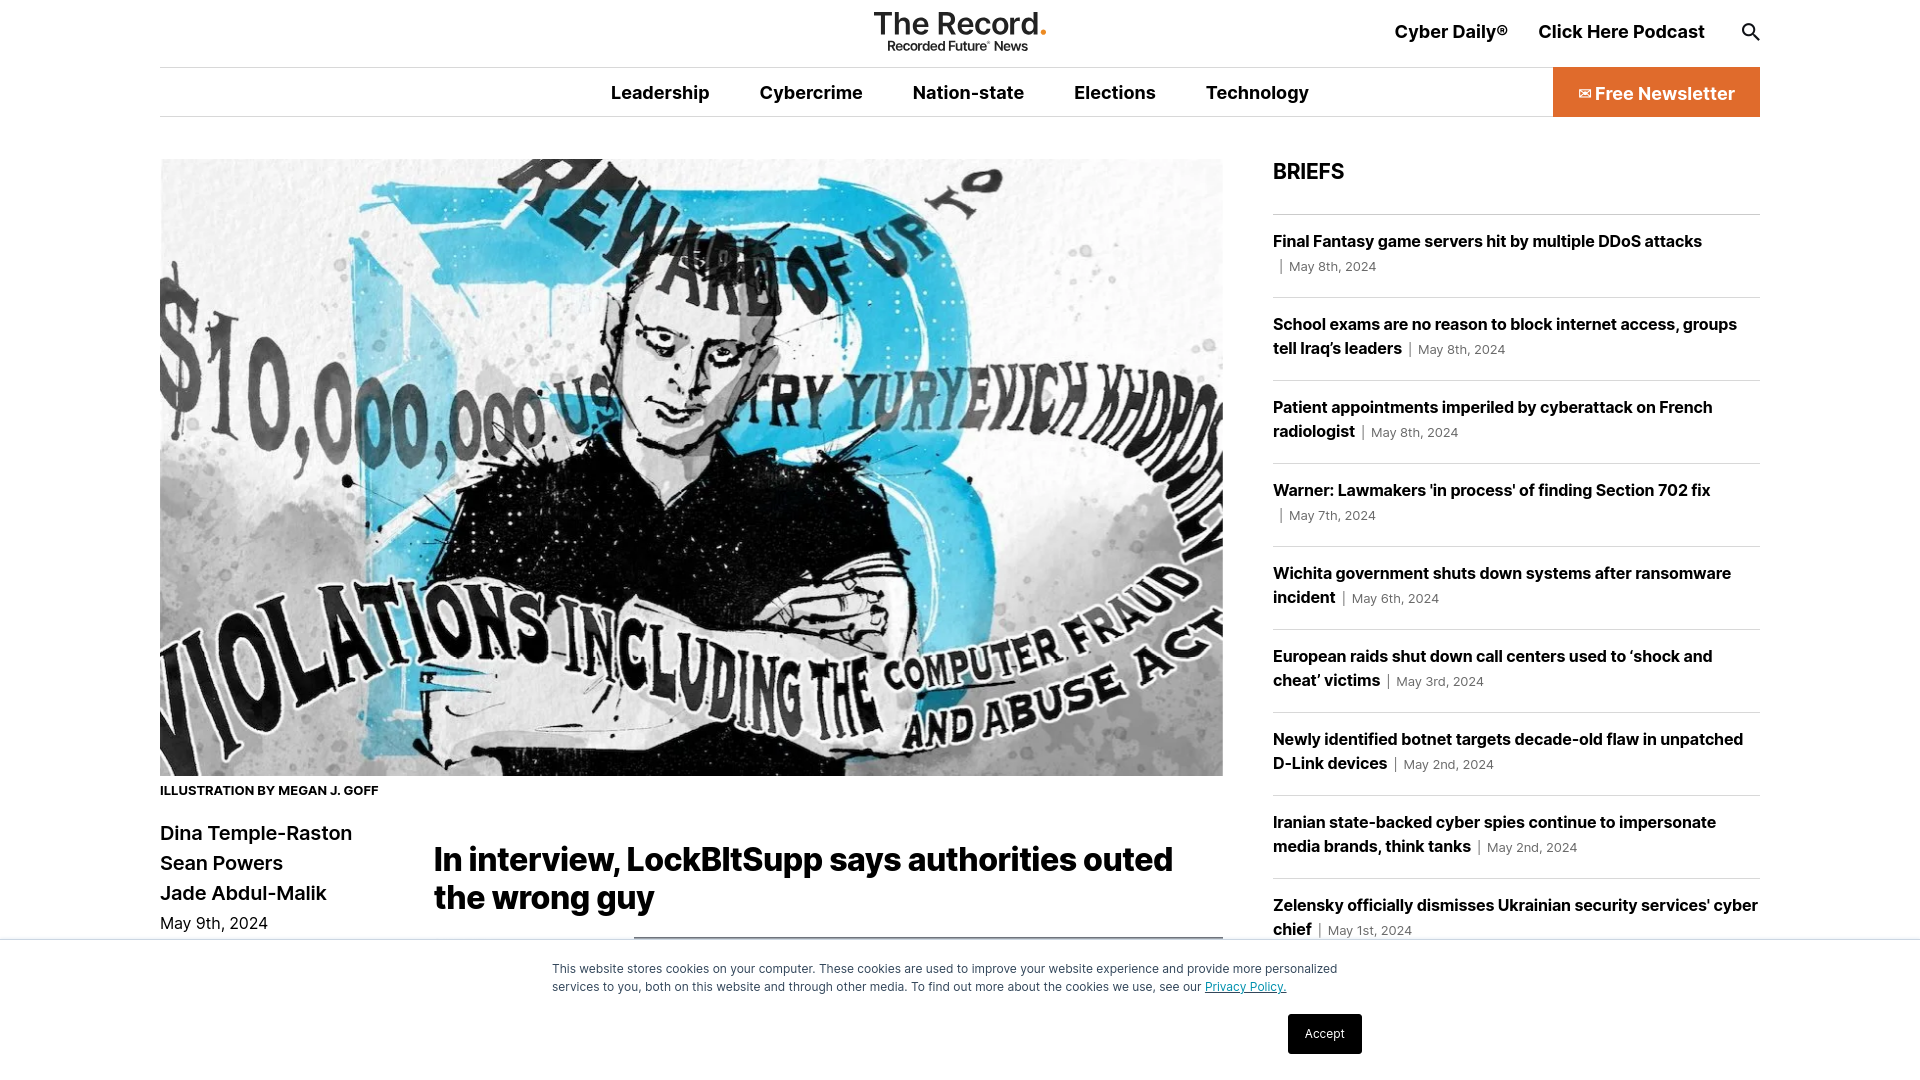 In interview, LockBItSupp says authorities outed the wrong guy